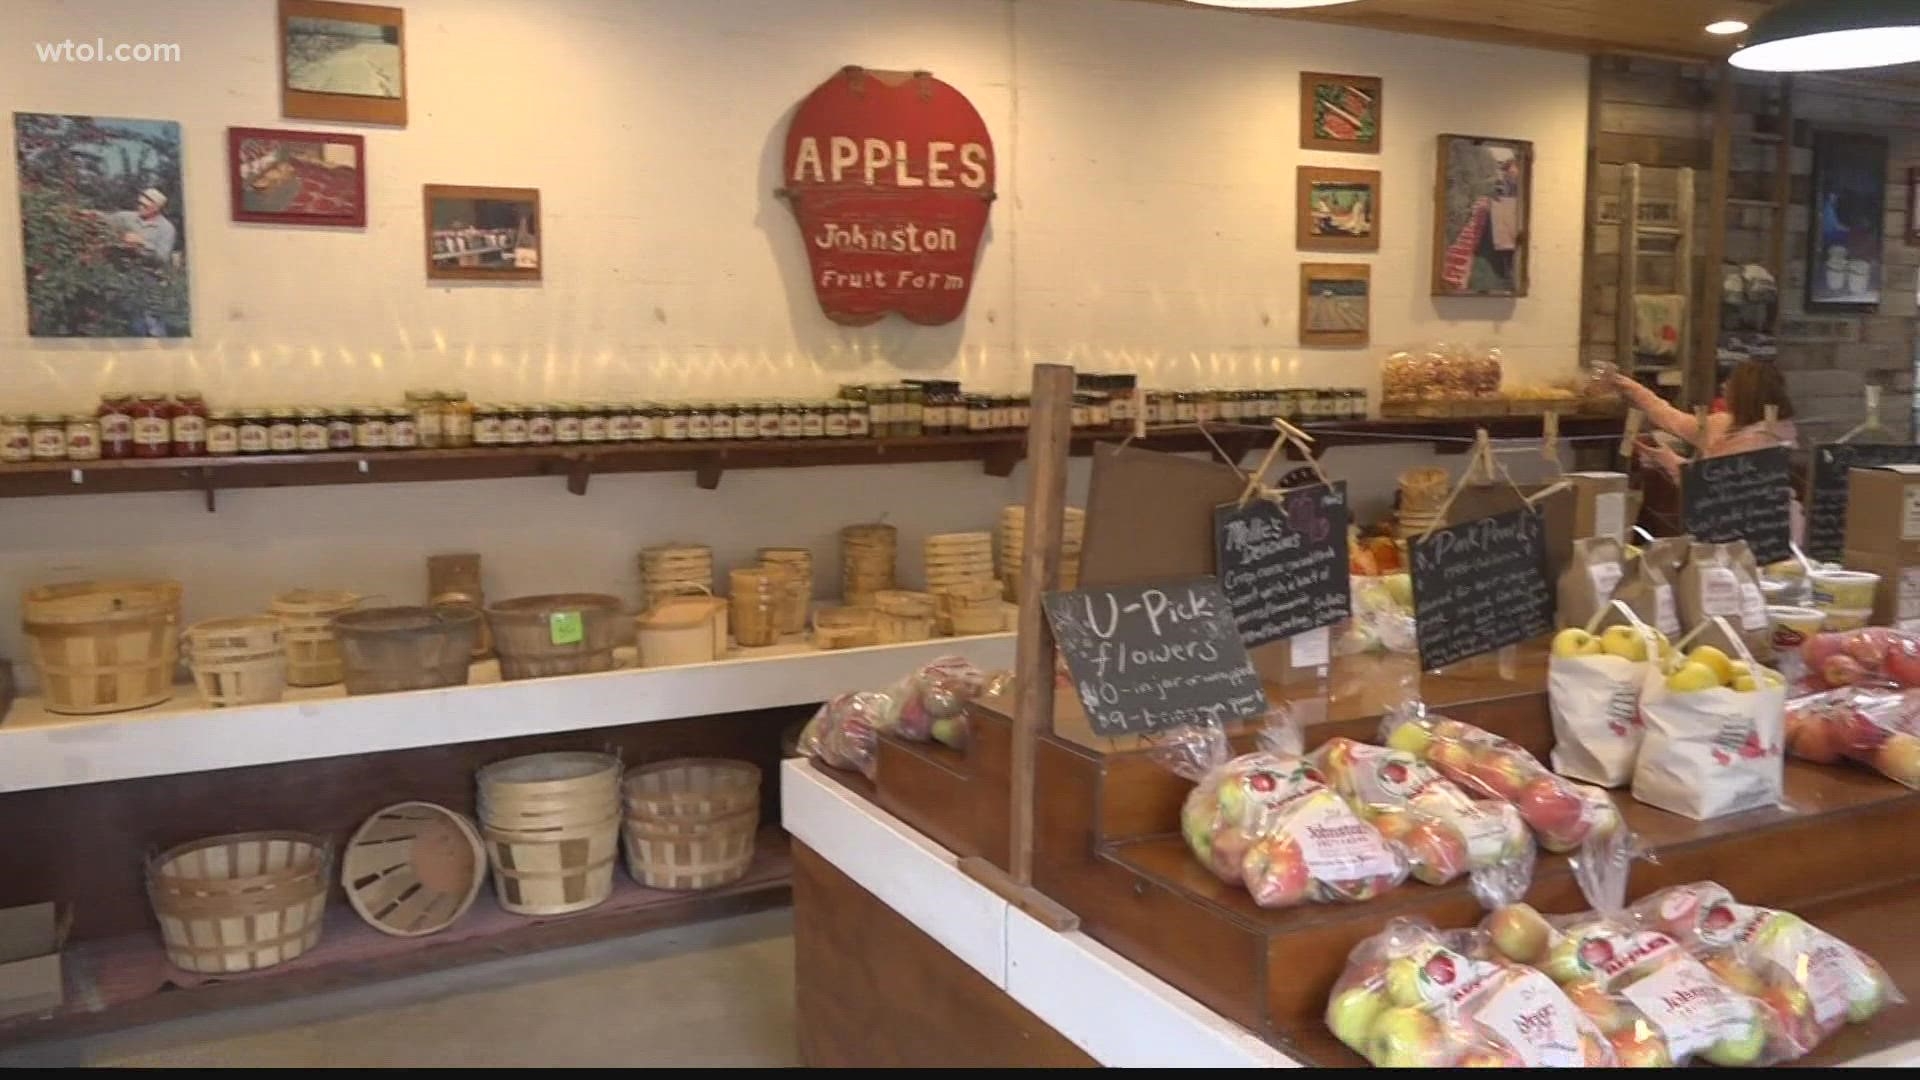 On Saturday, Johnston's will host their annual "Apples For Everyone" event, collecting apples for local food banks